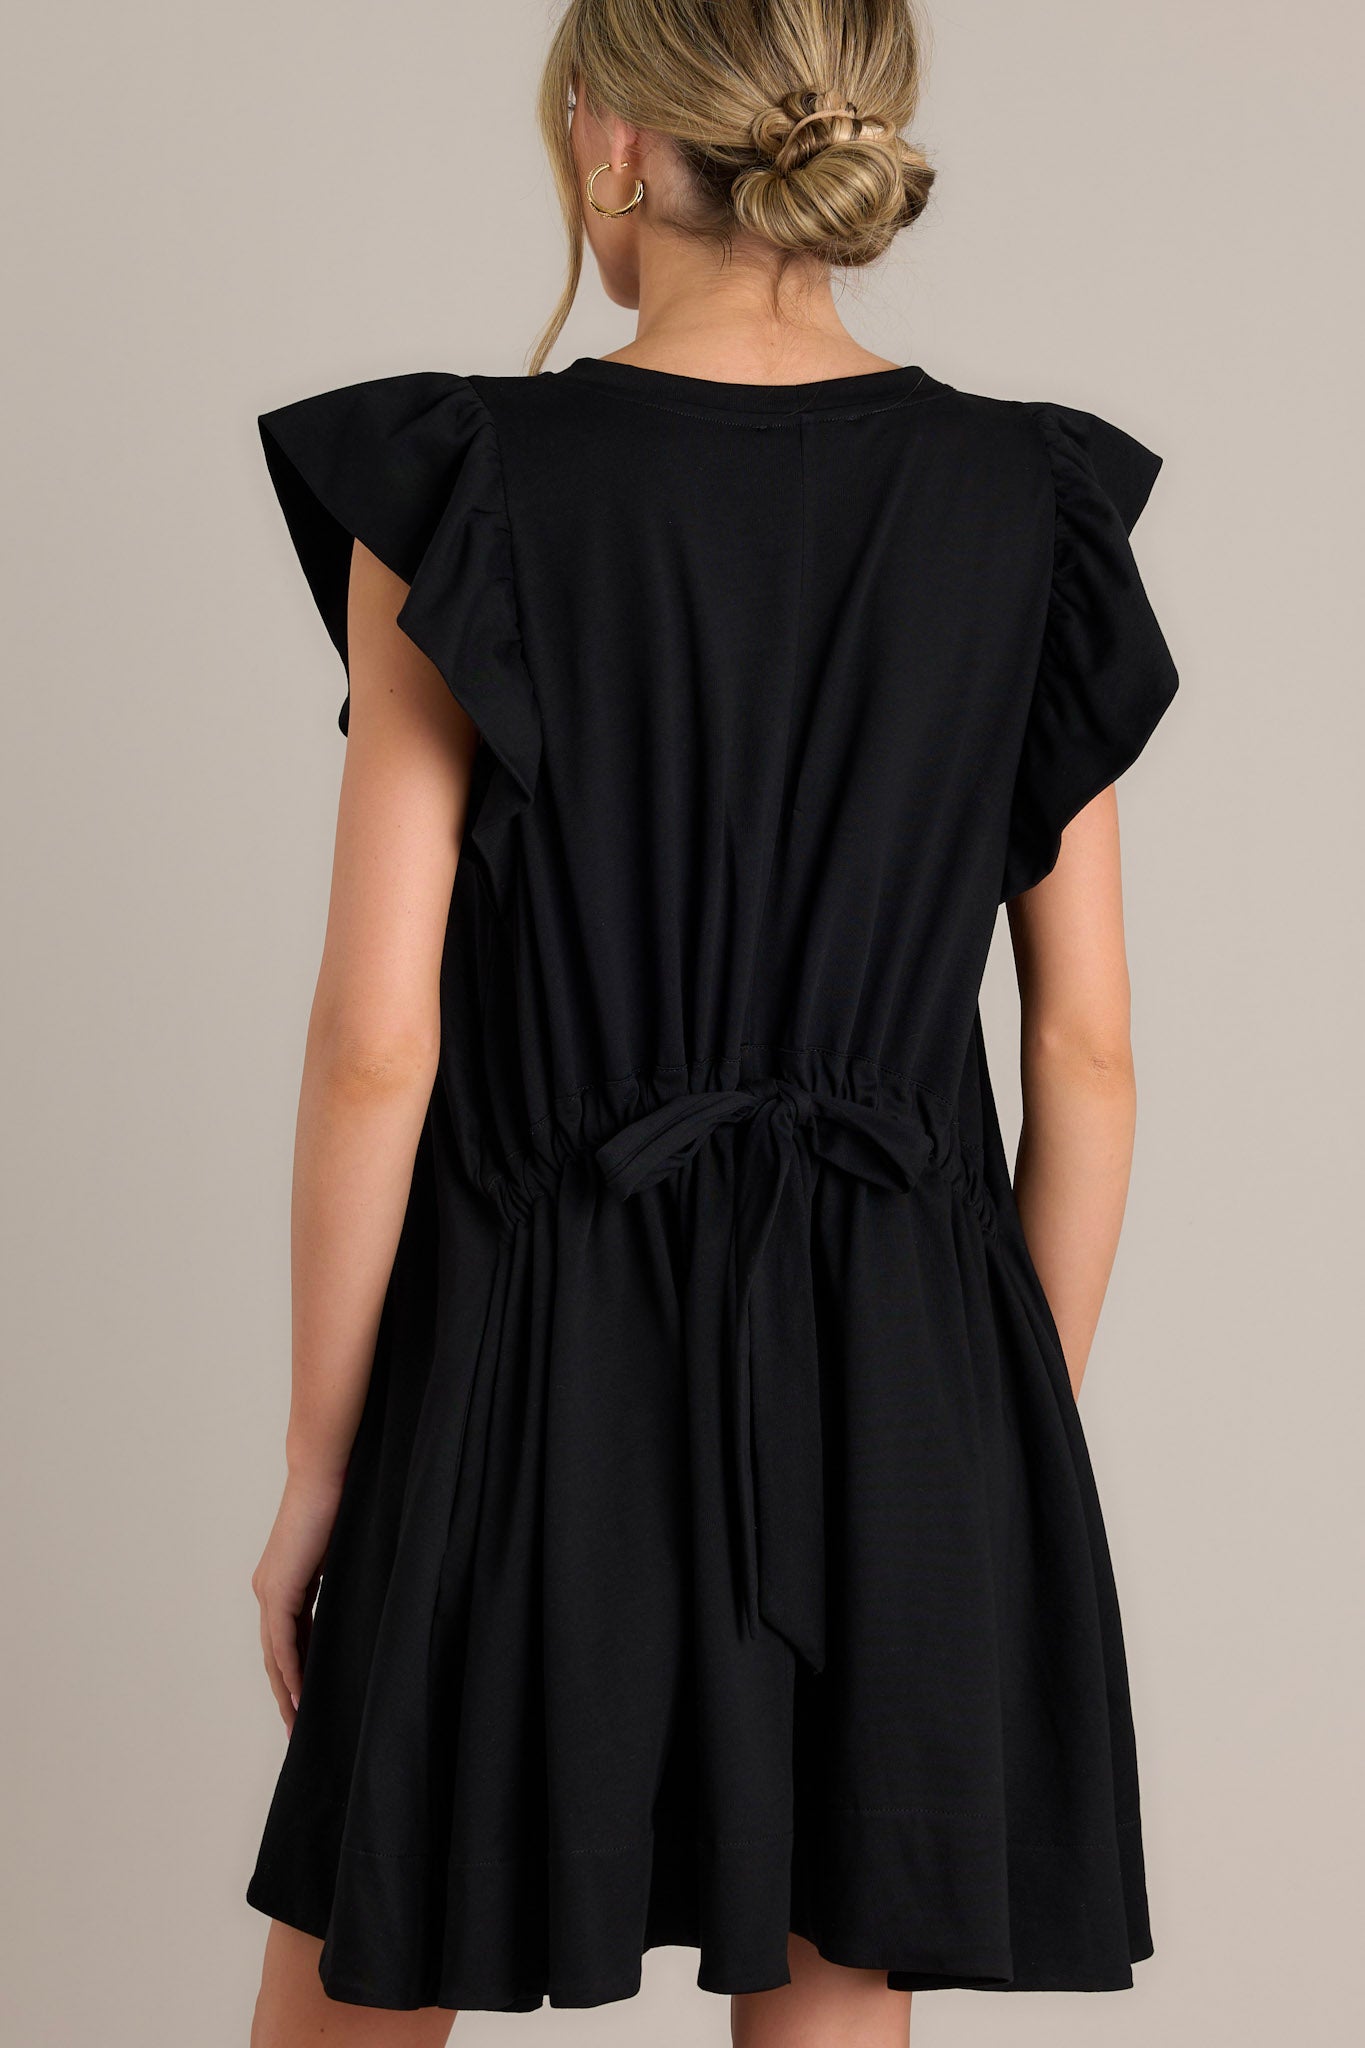 Back view of a black mini dress highlighting the self-tie drawstring waist feature and the overall fit.